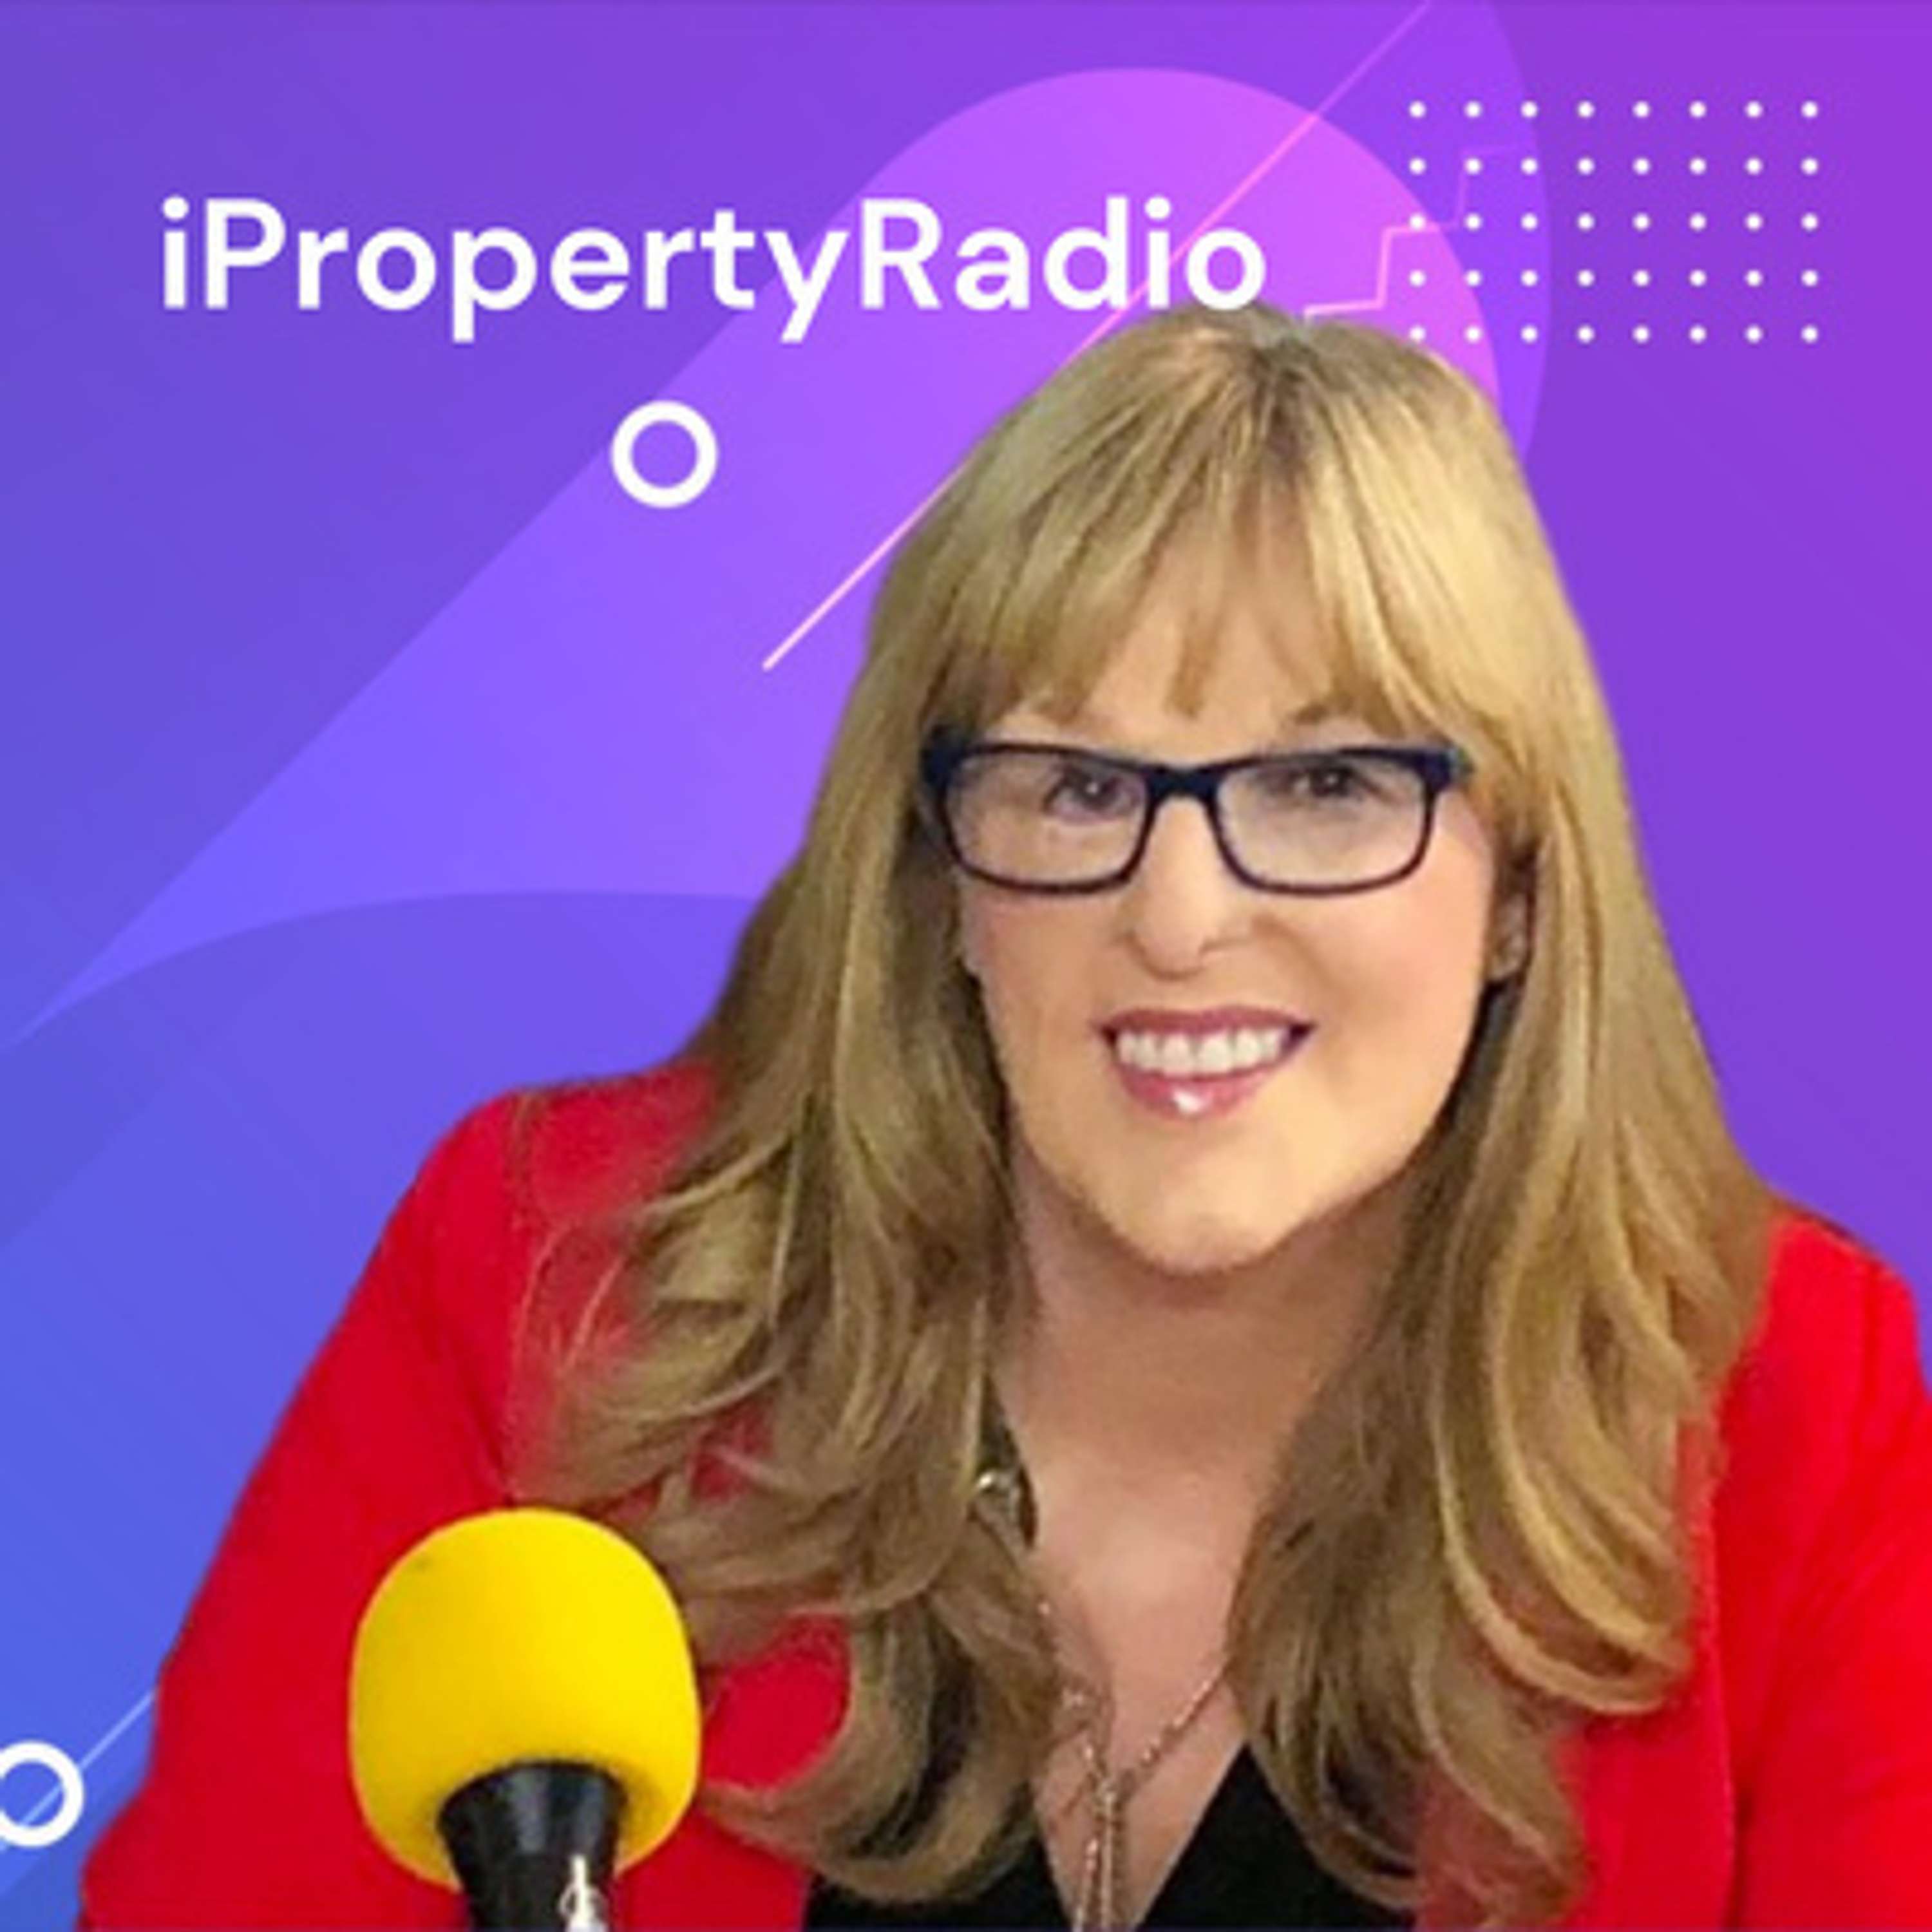 Ep.31 iPropertyRadio: Property Matters, August 27th 2019